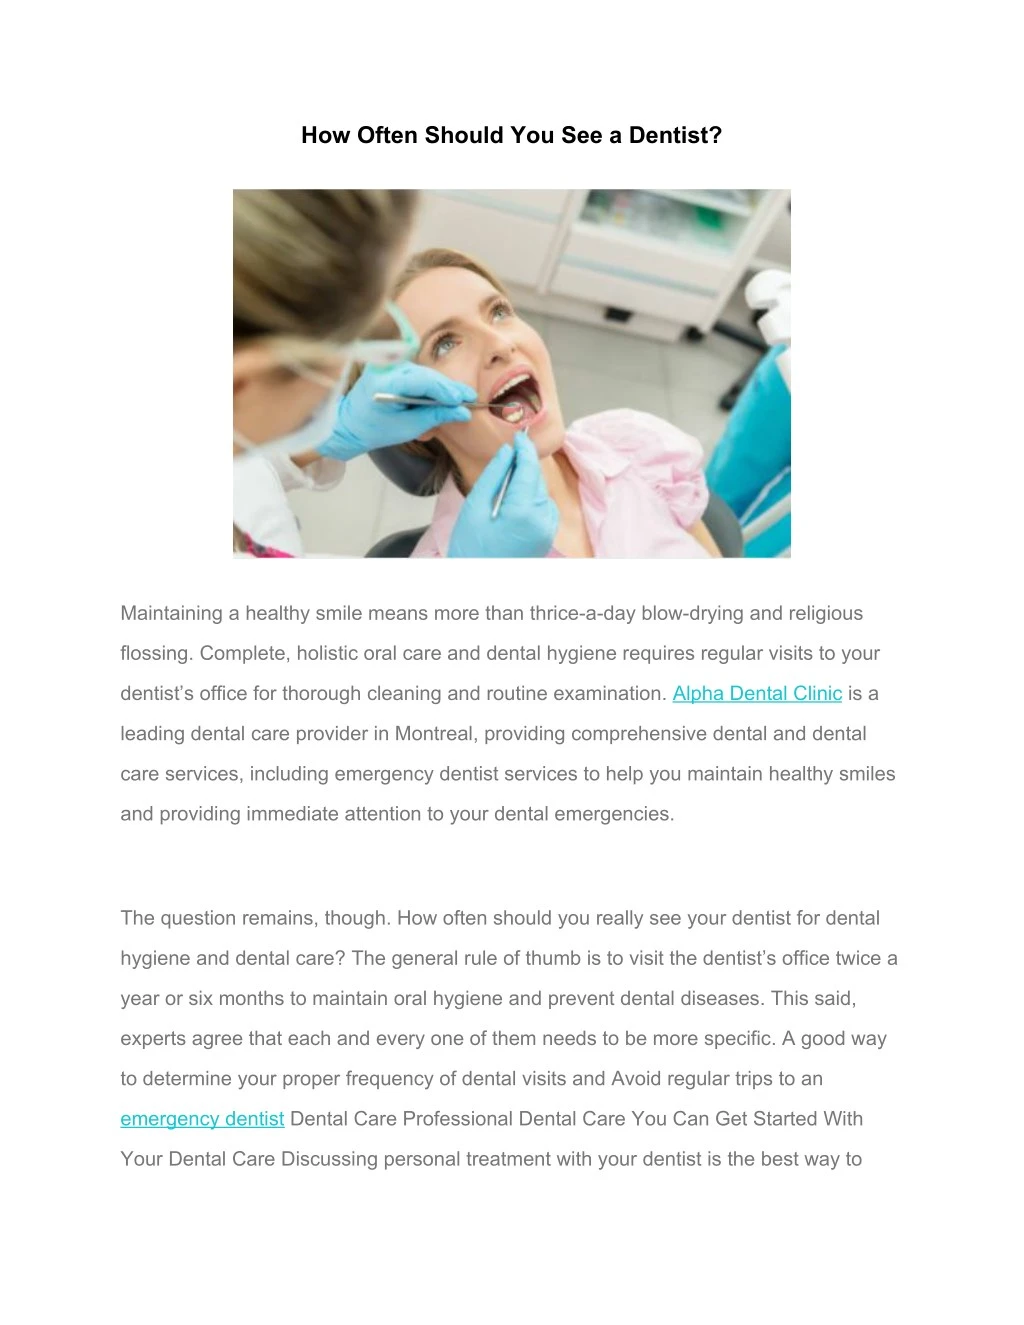 how often should you see a dentist